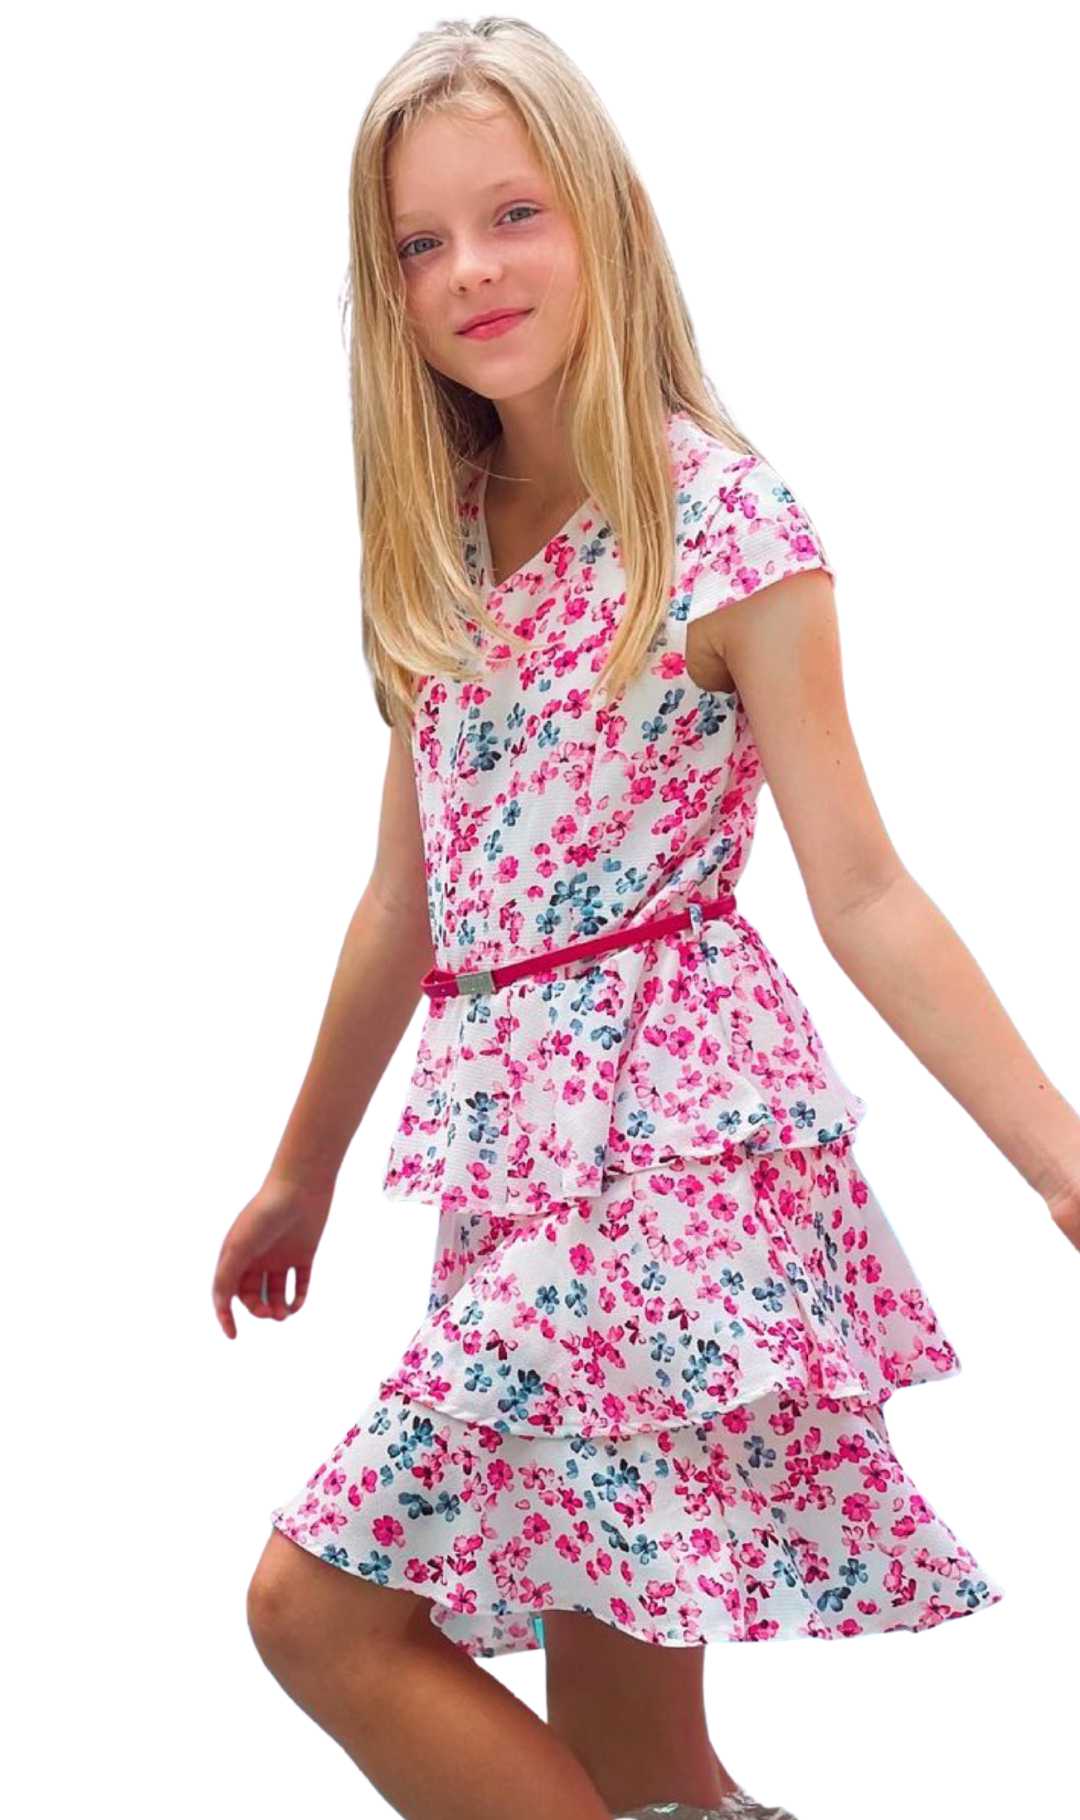 Flower Themed Girls Party Flower Girl Dresses For Birthdays, Weddings, And  Christmas Elegant Princess Style Vestidos For Children Aged 6 14 Years  Style #231110 From Cong06, $8 | DHgate.Com